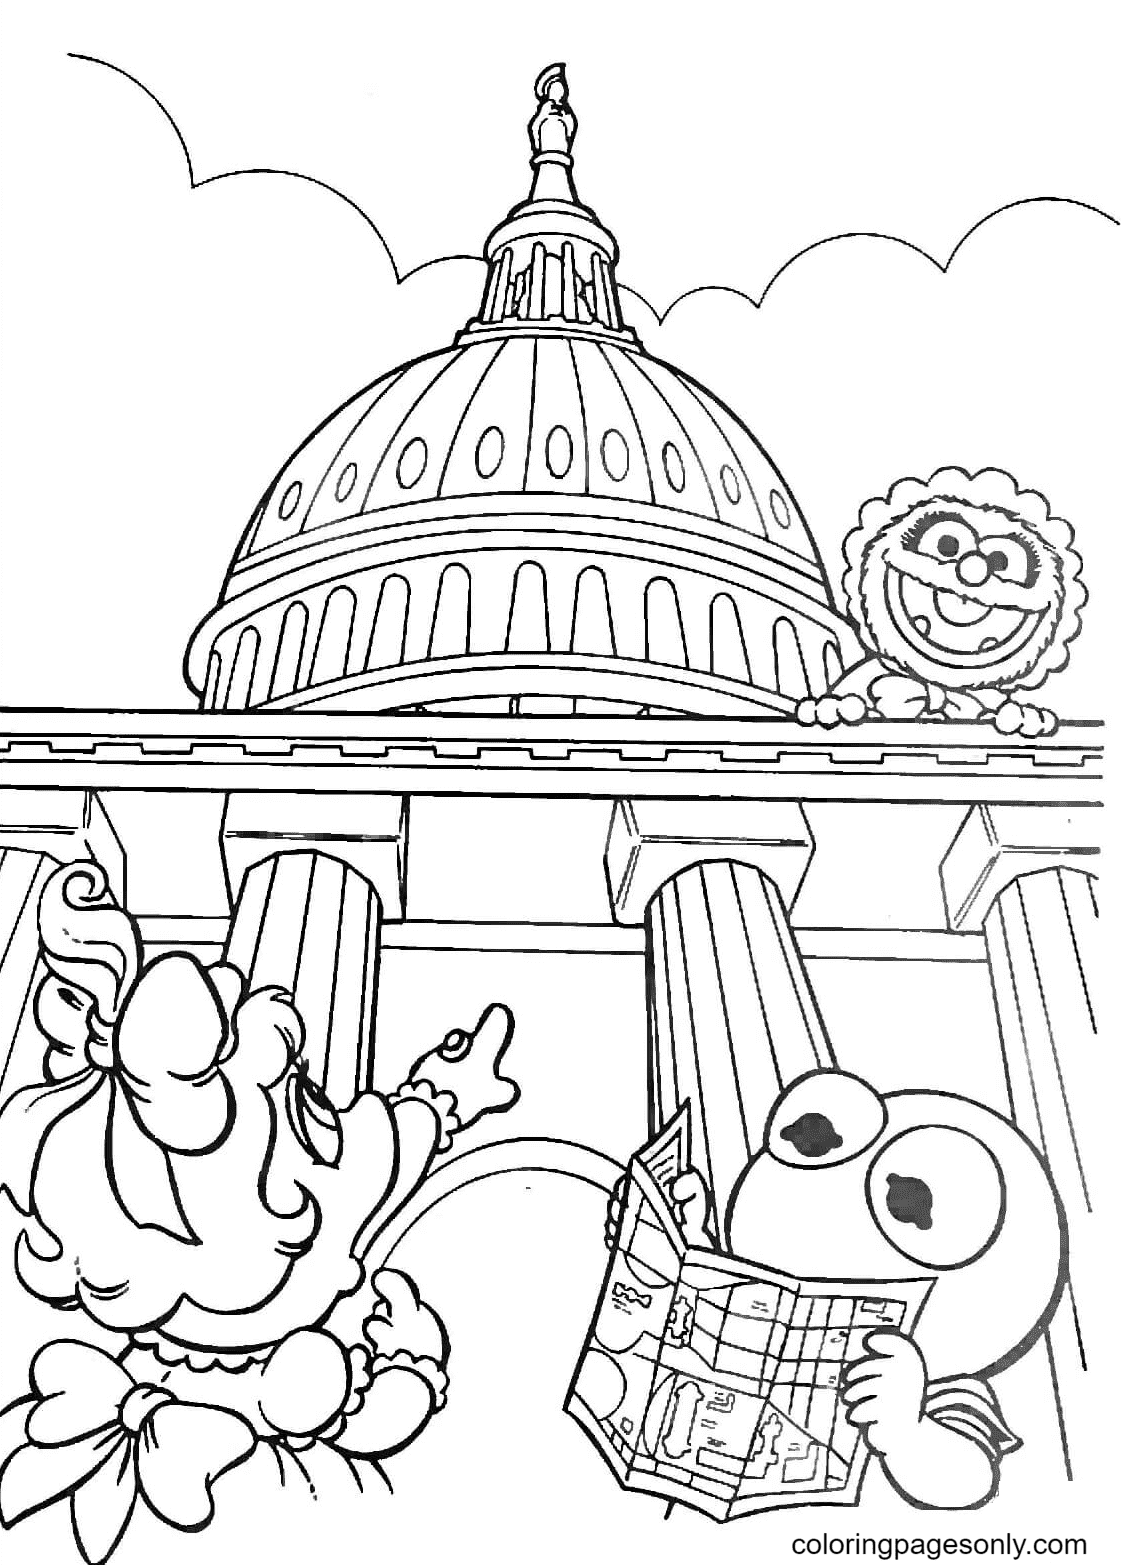 Muppet Babies in Washington DC Coloring Pages